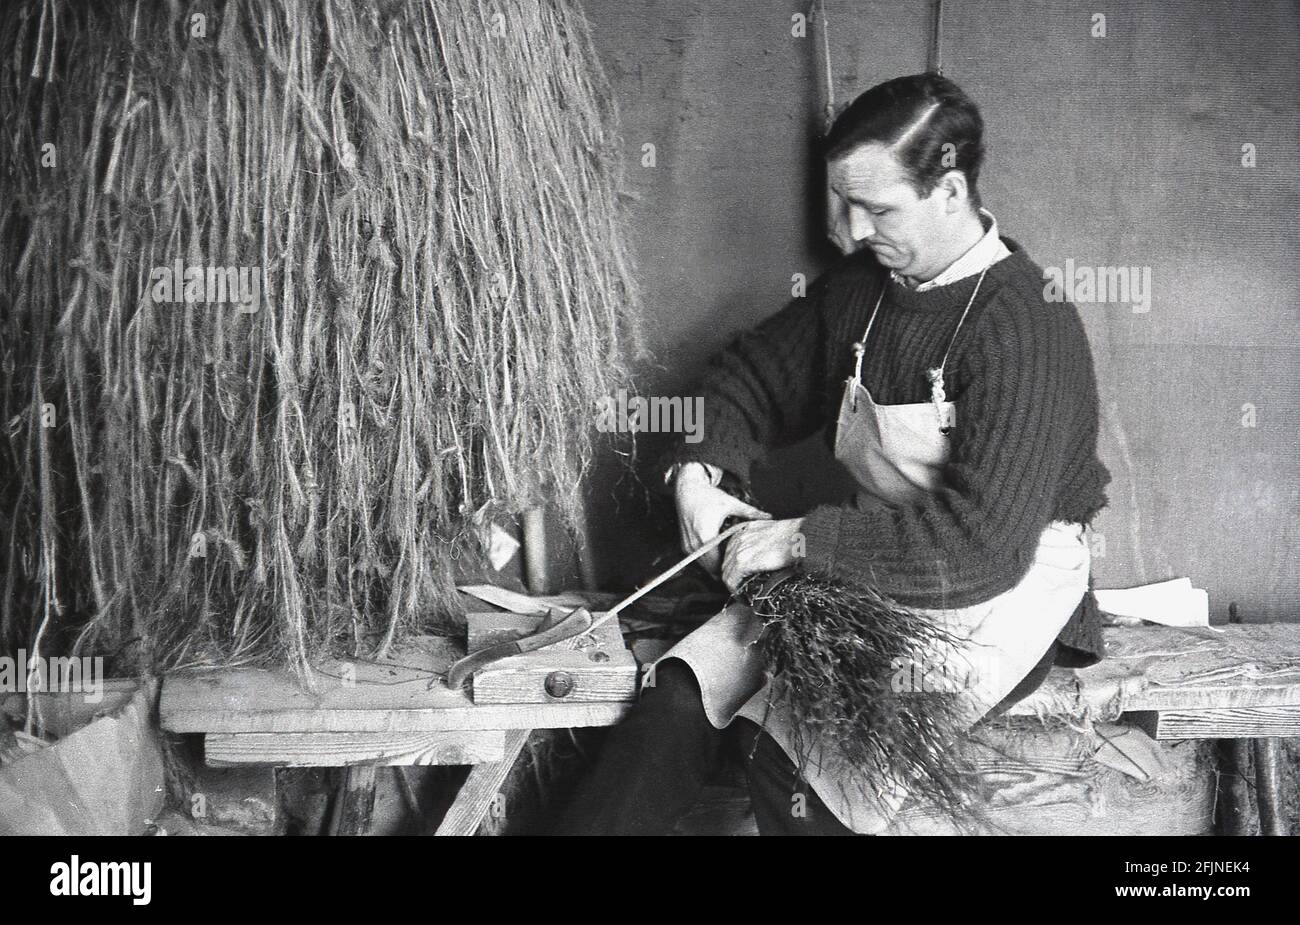 1950s, historical, a male artisan in his workshop making a broom, England, UK. An ancient craft, the making of brooms, also known as 'besoms' or 'besom making', consists of a bundle of tree twigs tied securely around a stick. Traditionally, besom brooms were made from twigs of the birch tree and a village broom squire and coppiceworker both produced them. Today, lIke many ancient rural crafts, this highly specialised artisan trade has almost completely died out and there are now fewer than five besom makers in the UK who make brooms on a commmerical basis. Stock Photo